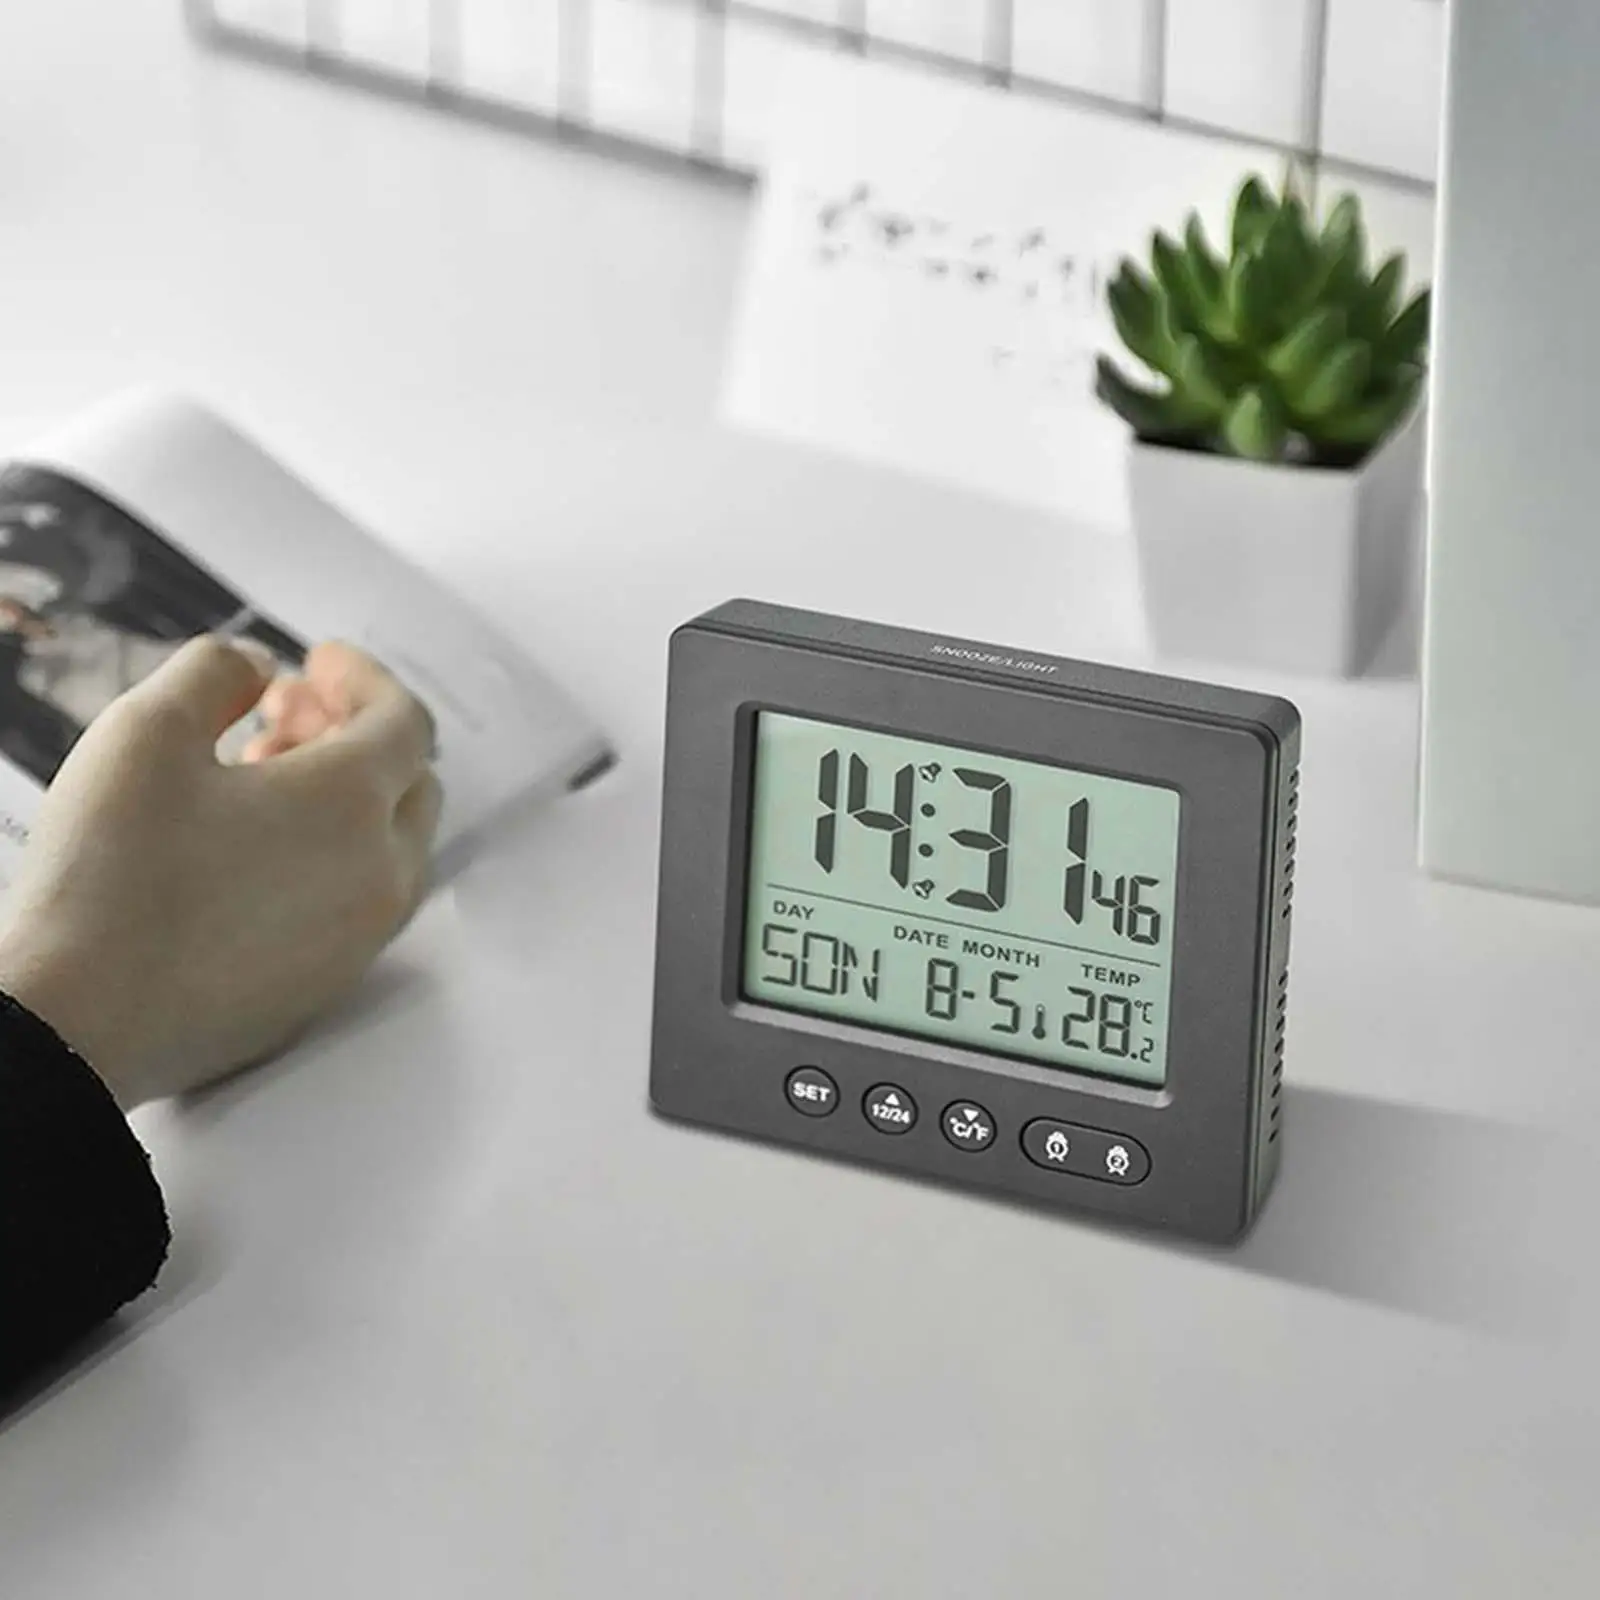 Digital Clock Modern Snooze Time Week Date Temperature Display LCD Night Light Clocks for Dining Room Decor Gift Office